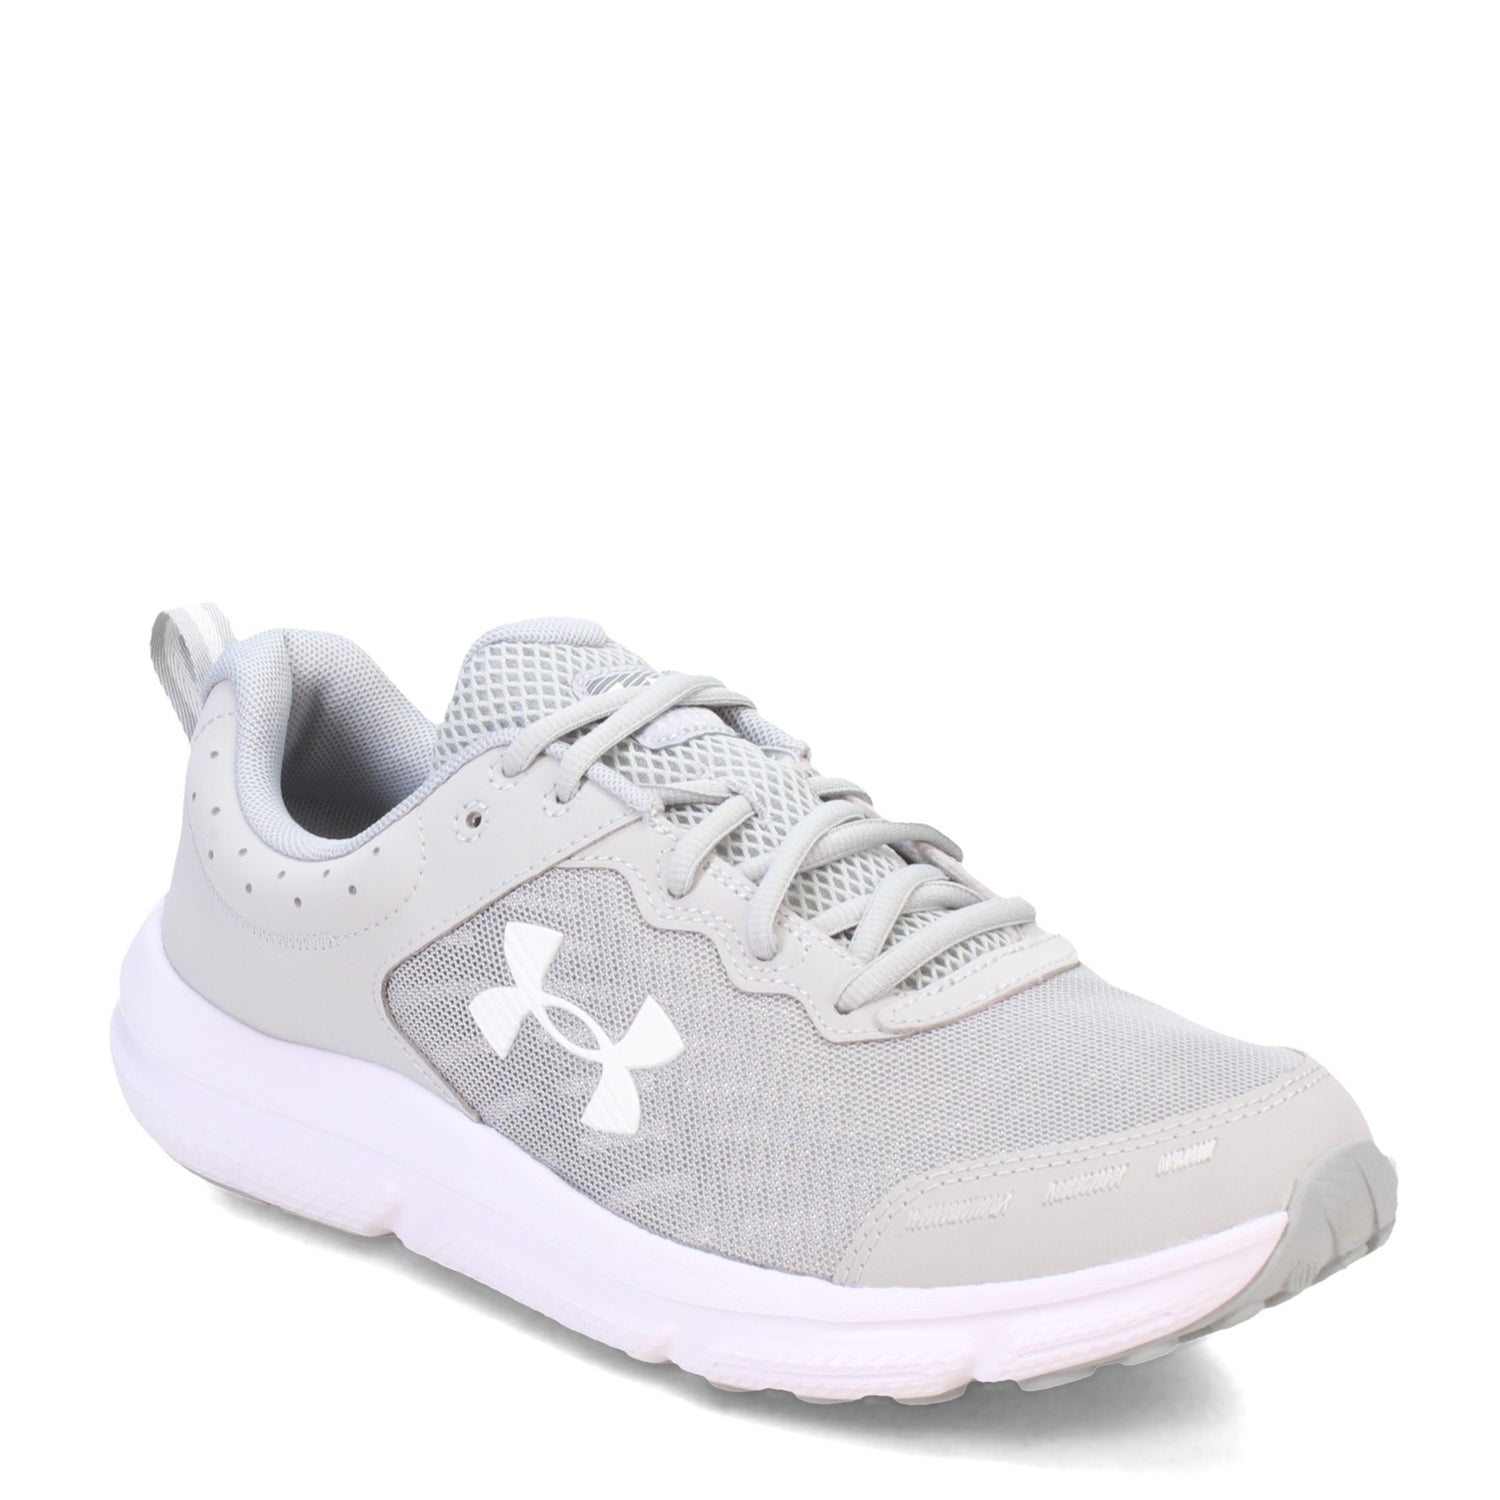 Under Armour Women's Charged Breeze, (100) White